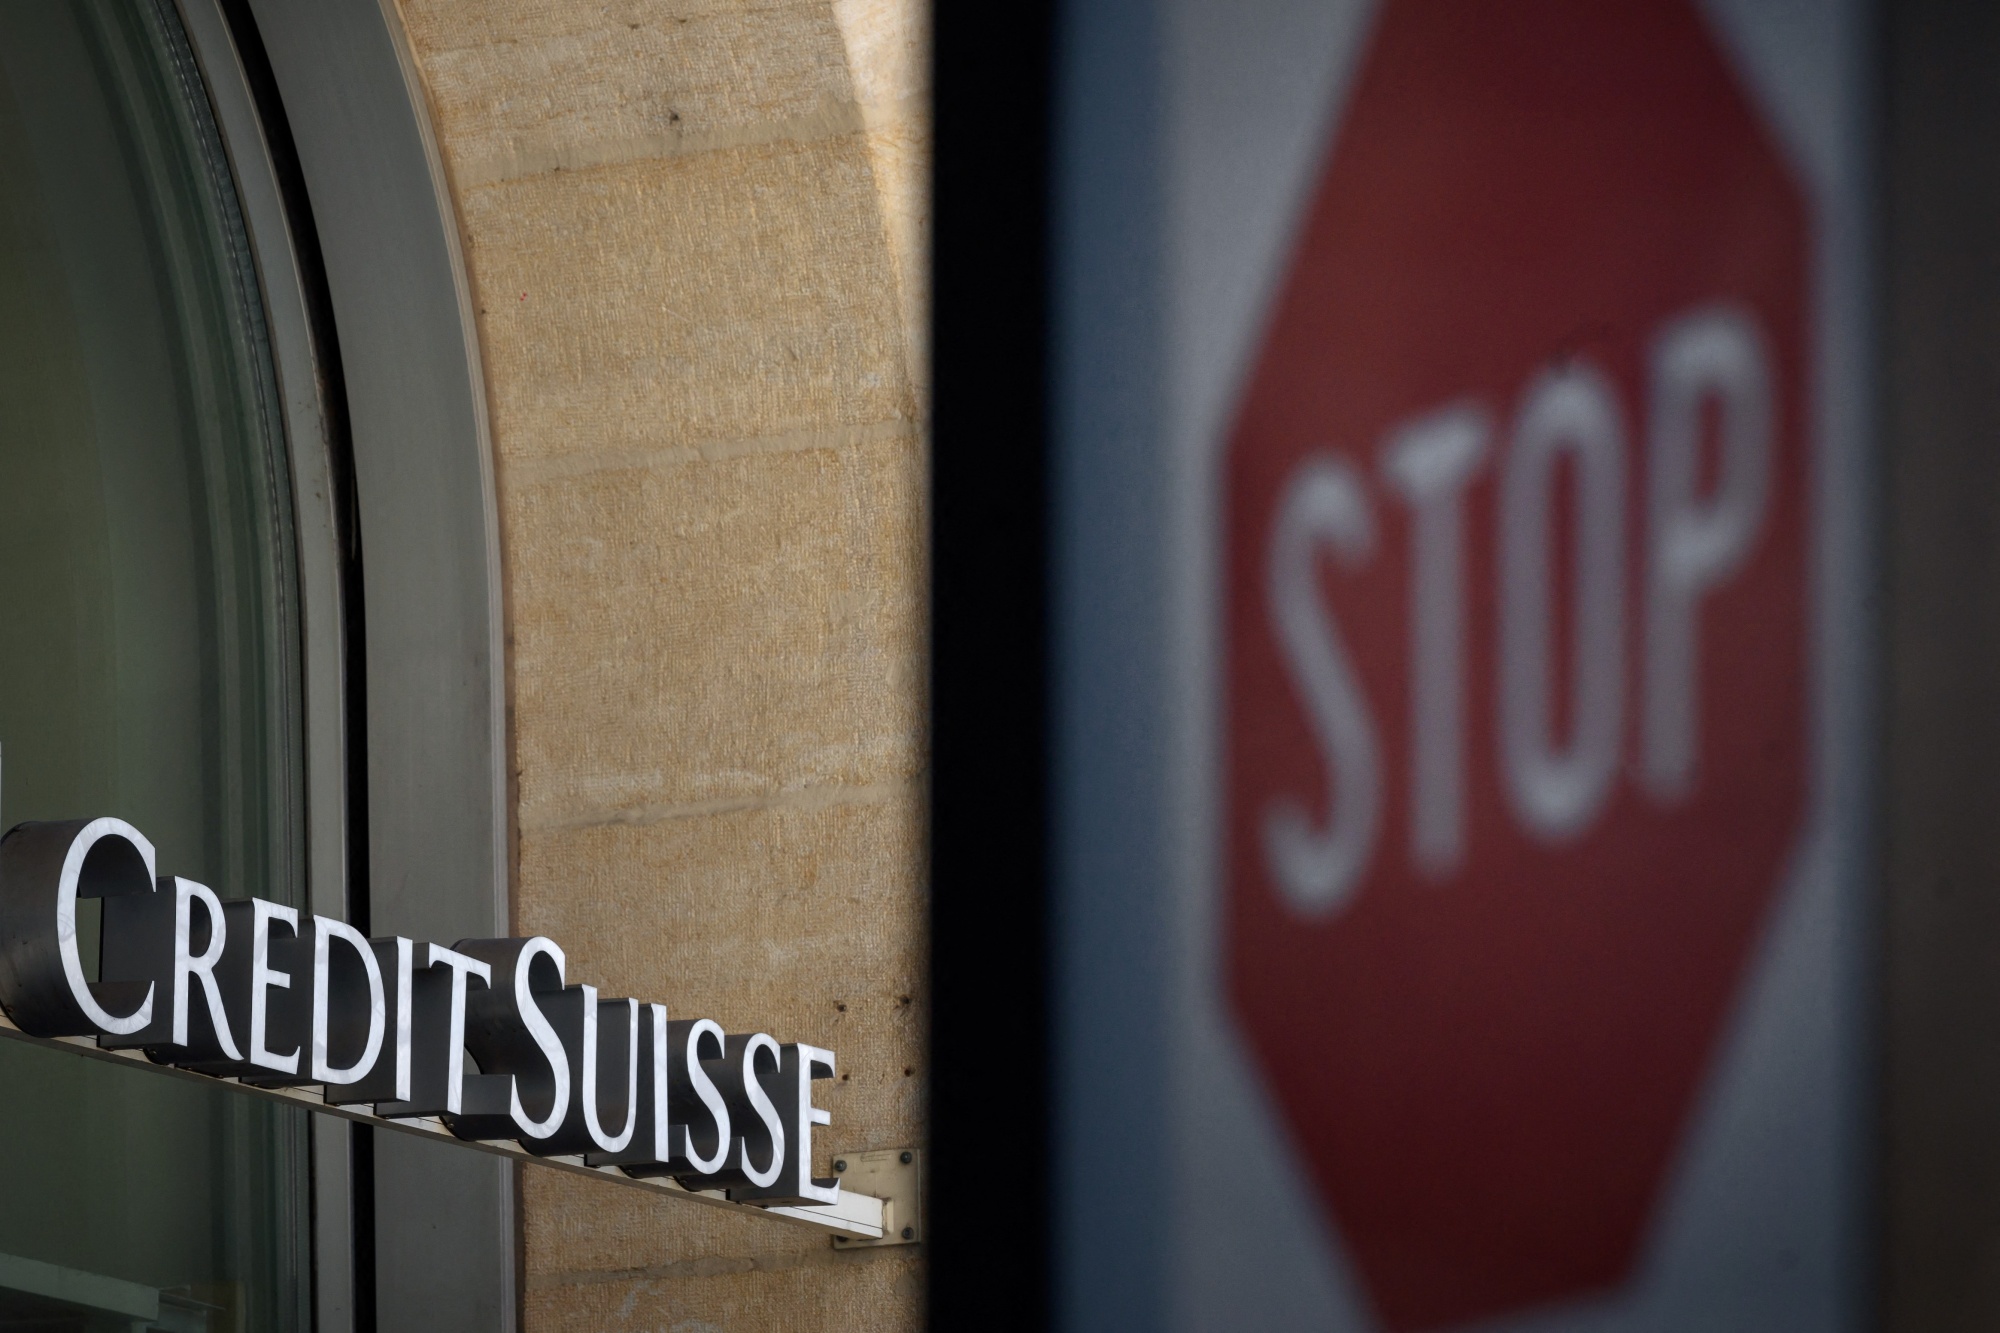 How many red flags did Credit Suisse need?